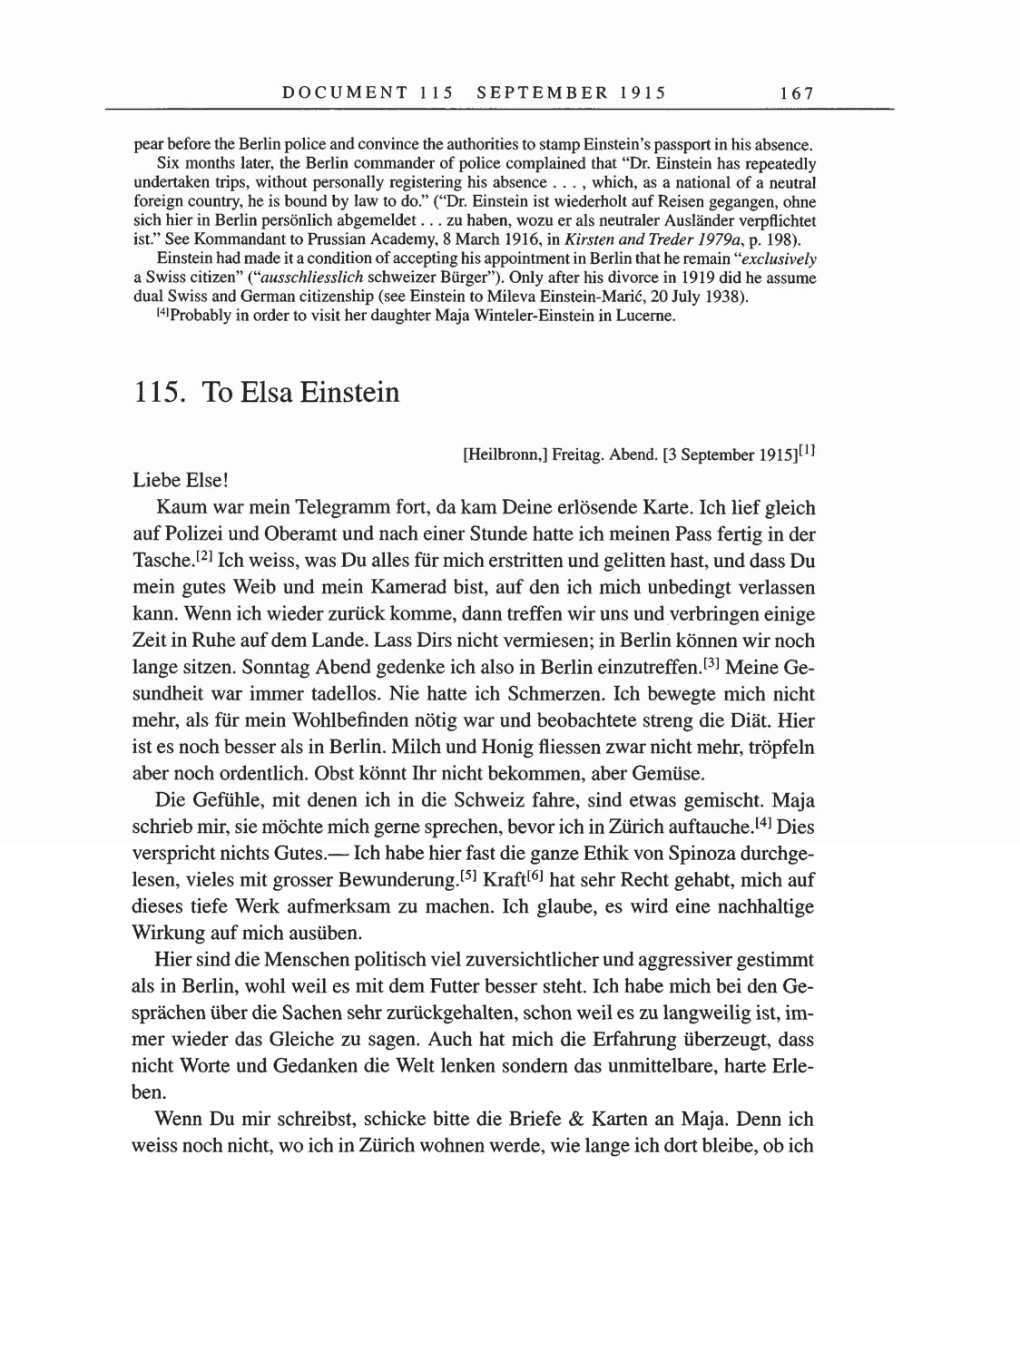 Volume 8, Part A: The Berlin Years: Correspondence 1914-1917 page 167